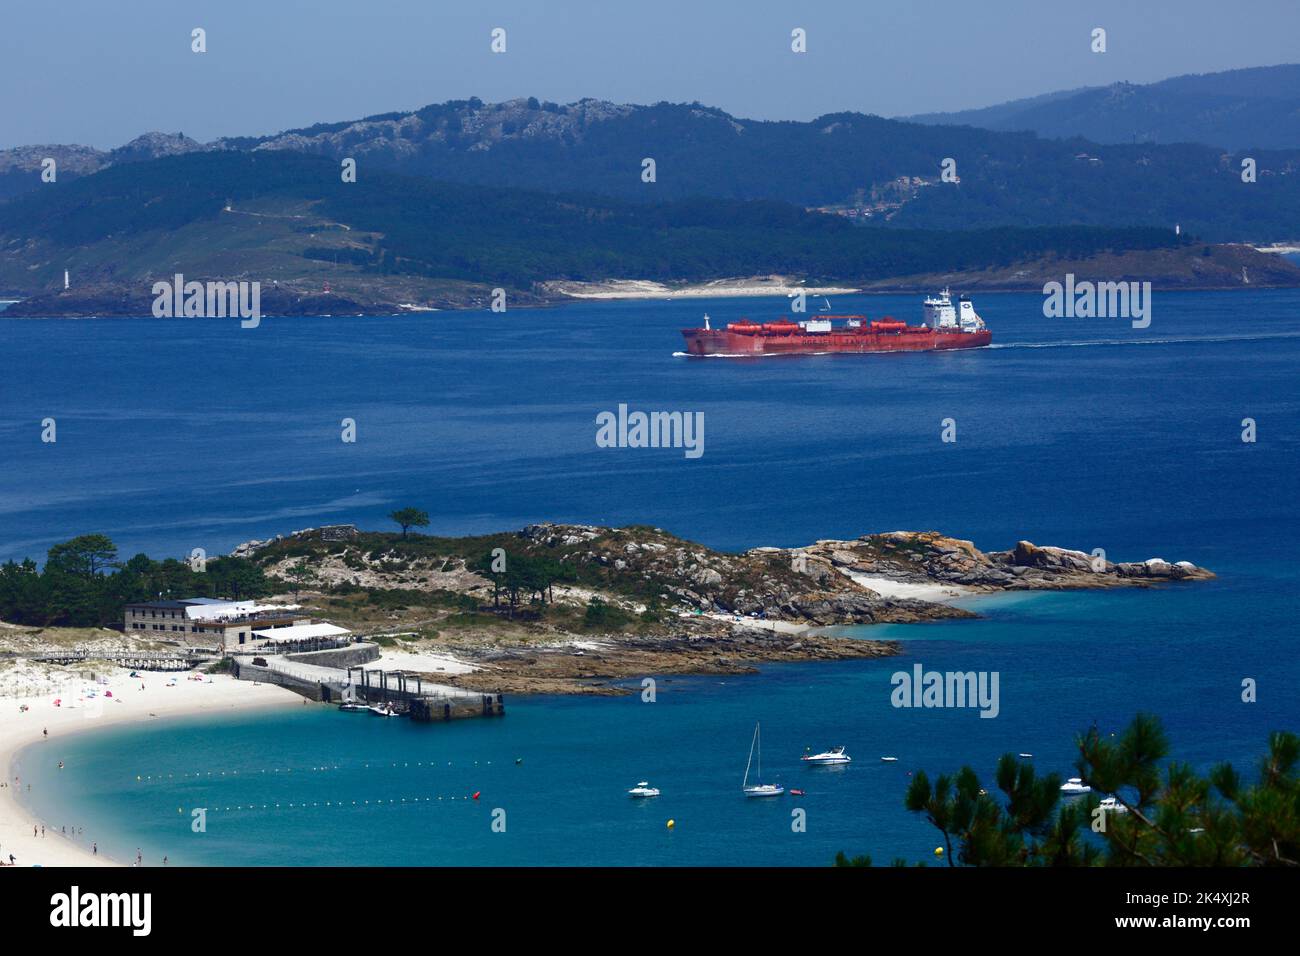 The Bow Summer (a chemical tanker owned by Norwegian company Odfjell Tankers) passing the Cies Islands as it leaves the Ria de Vigo, Galicia, Spain Stock Photo